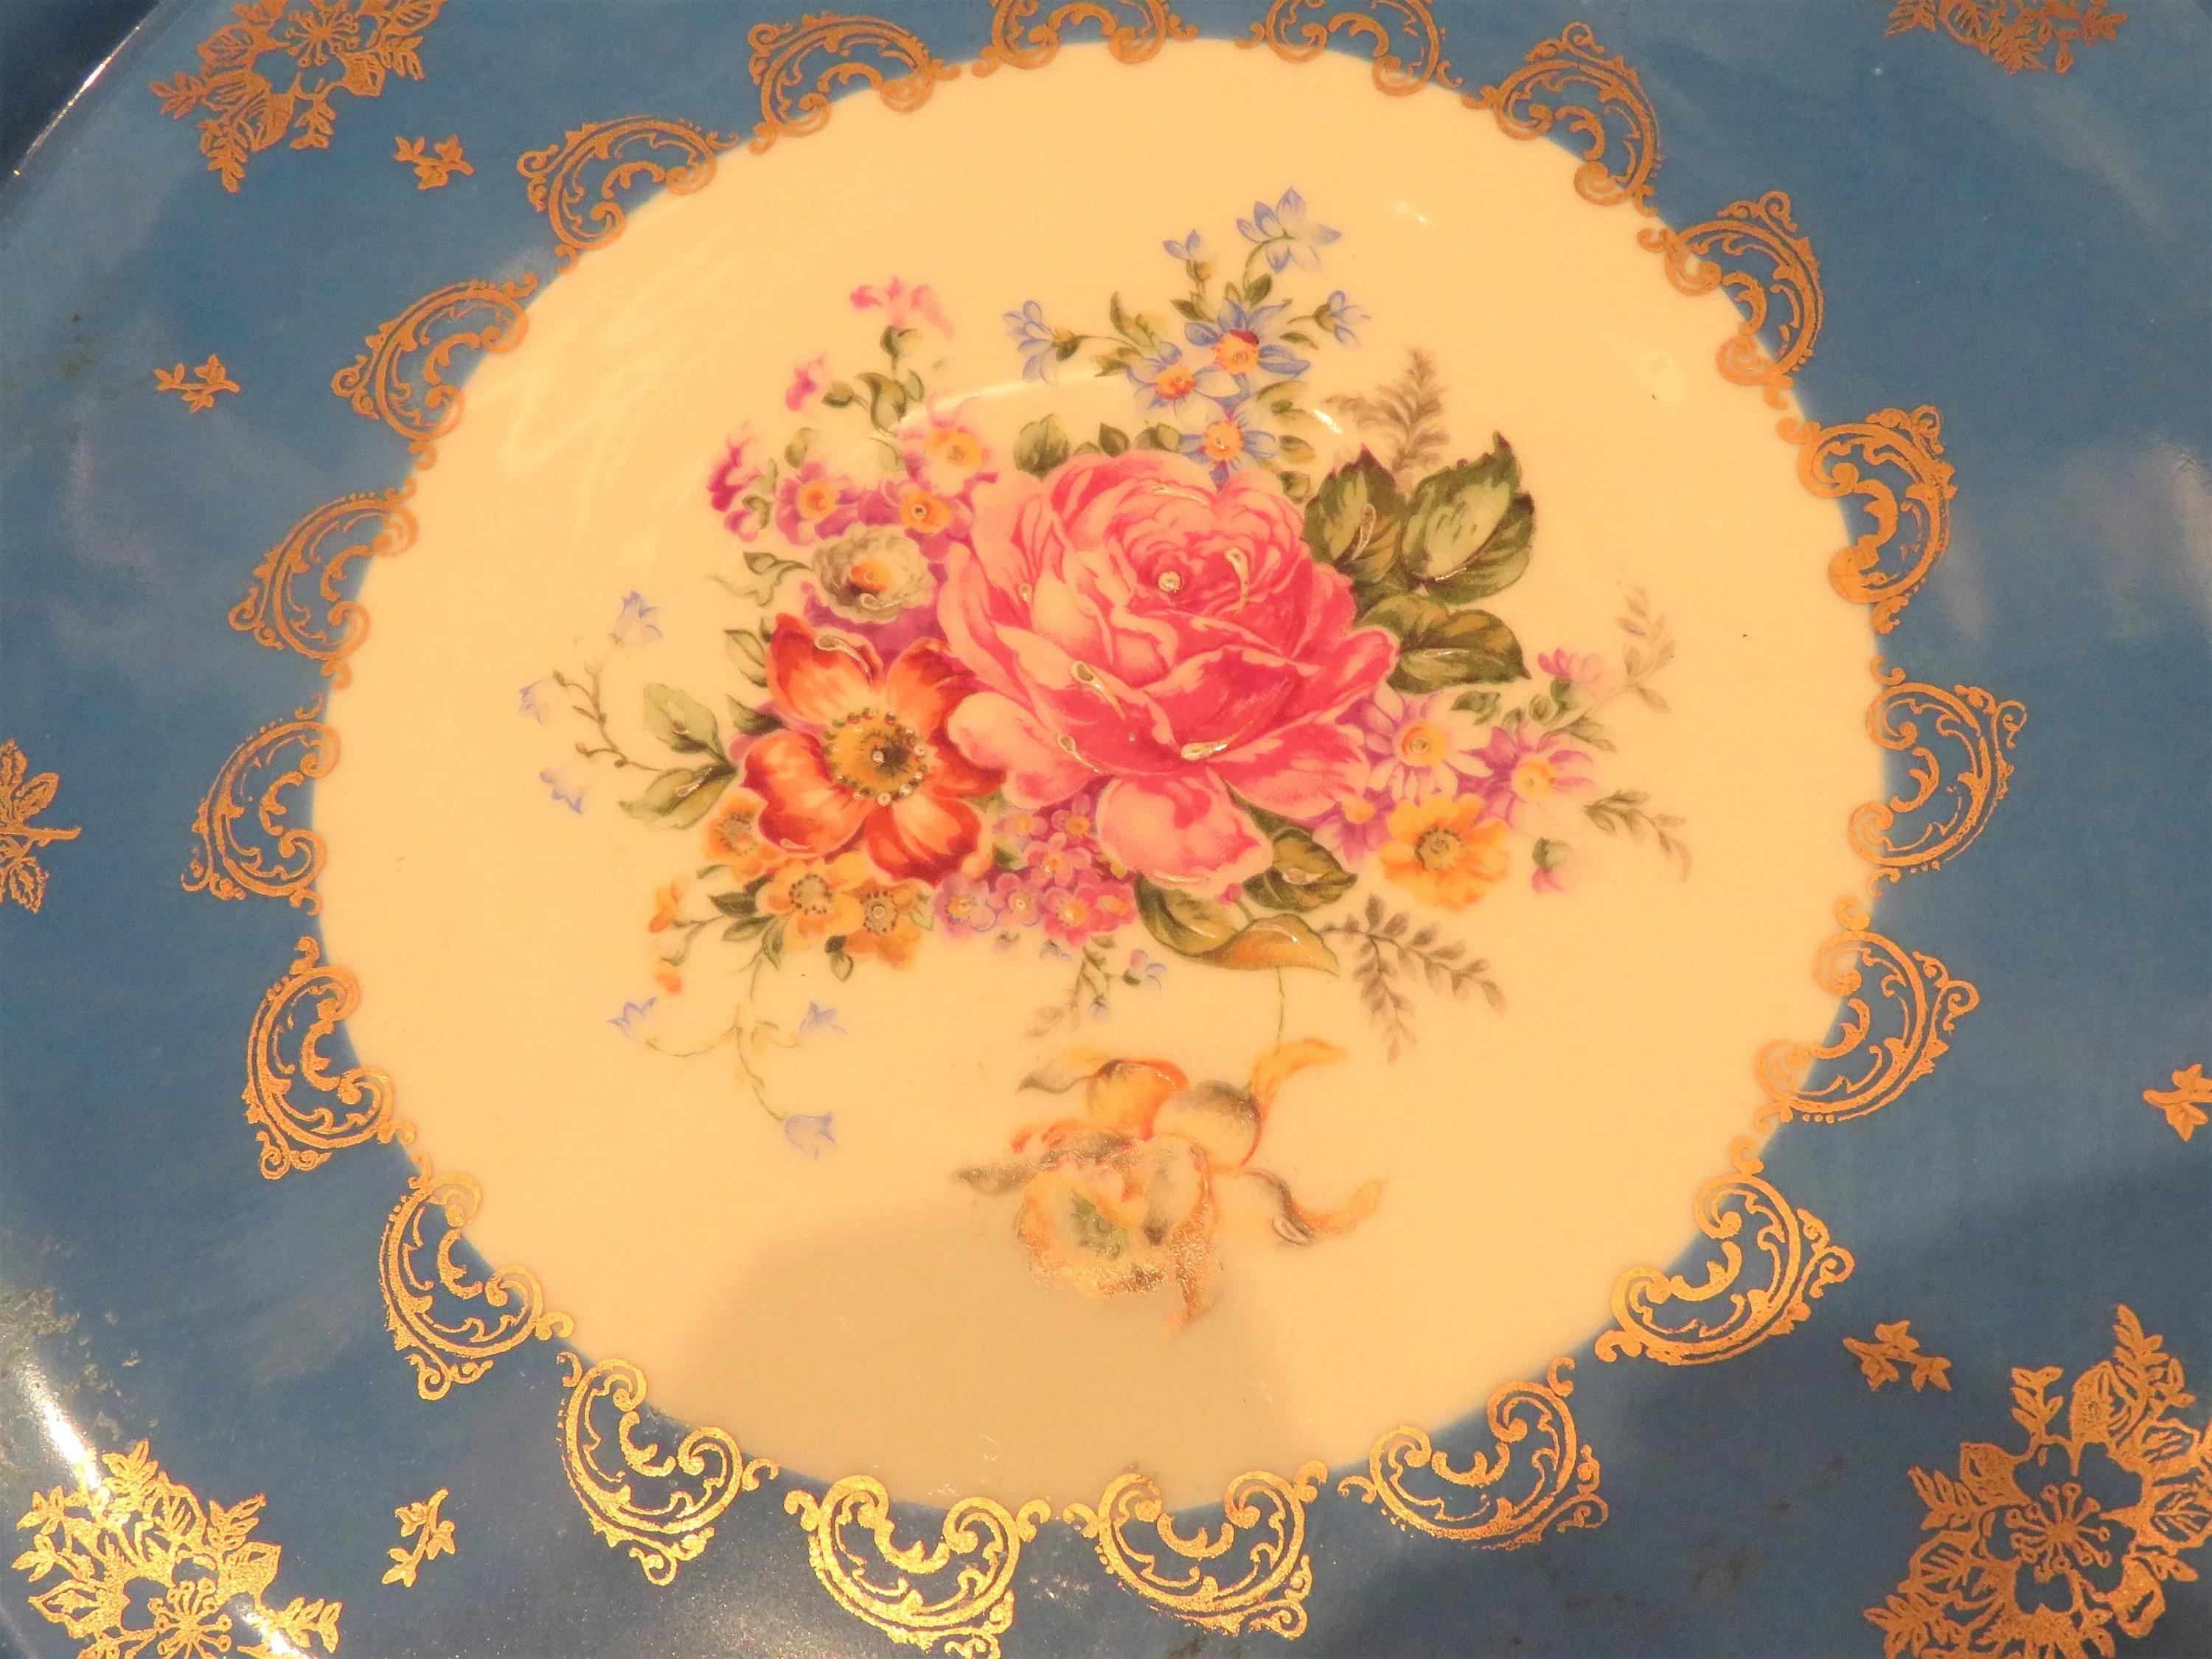 Exquisite French Floral Scroll Handpainted Sevres Style Limoges Cake Centerpiece In Good Condition For Sale In New York, NY